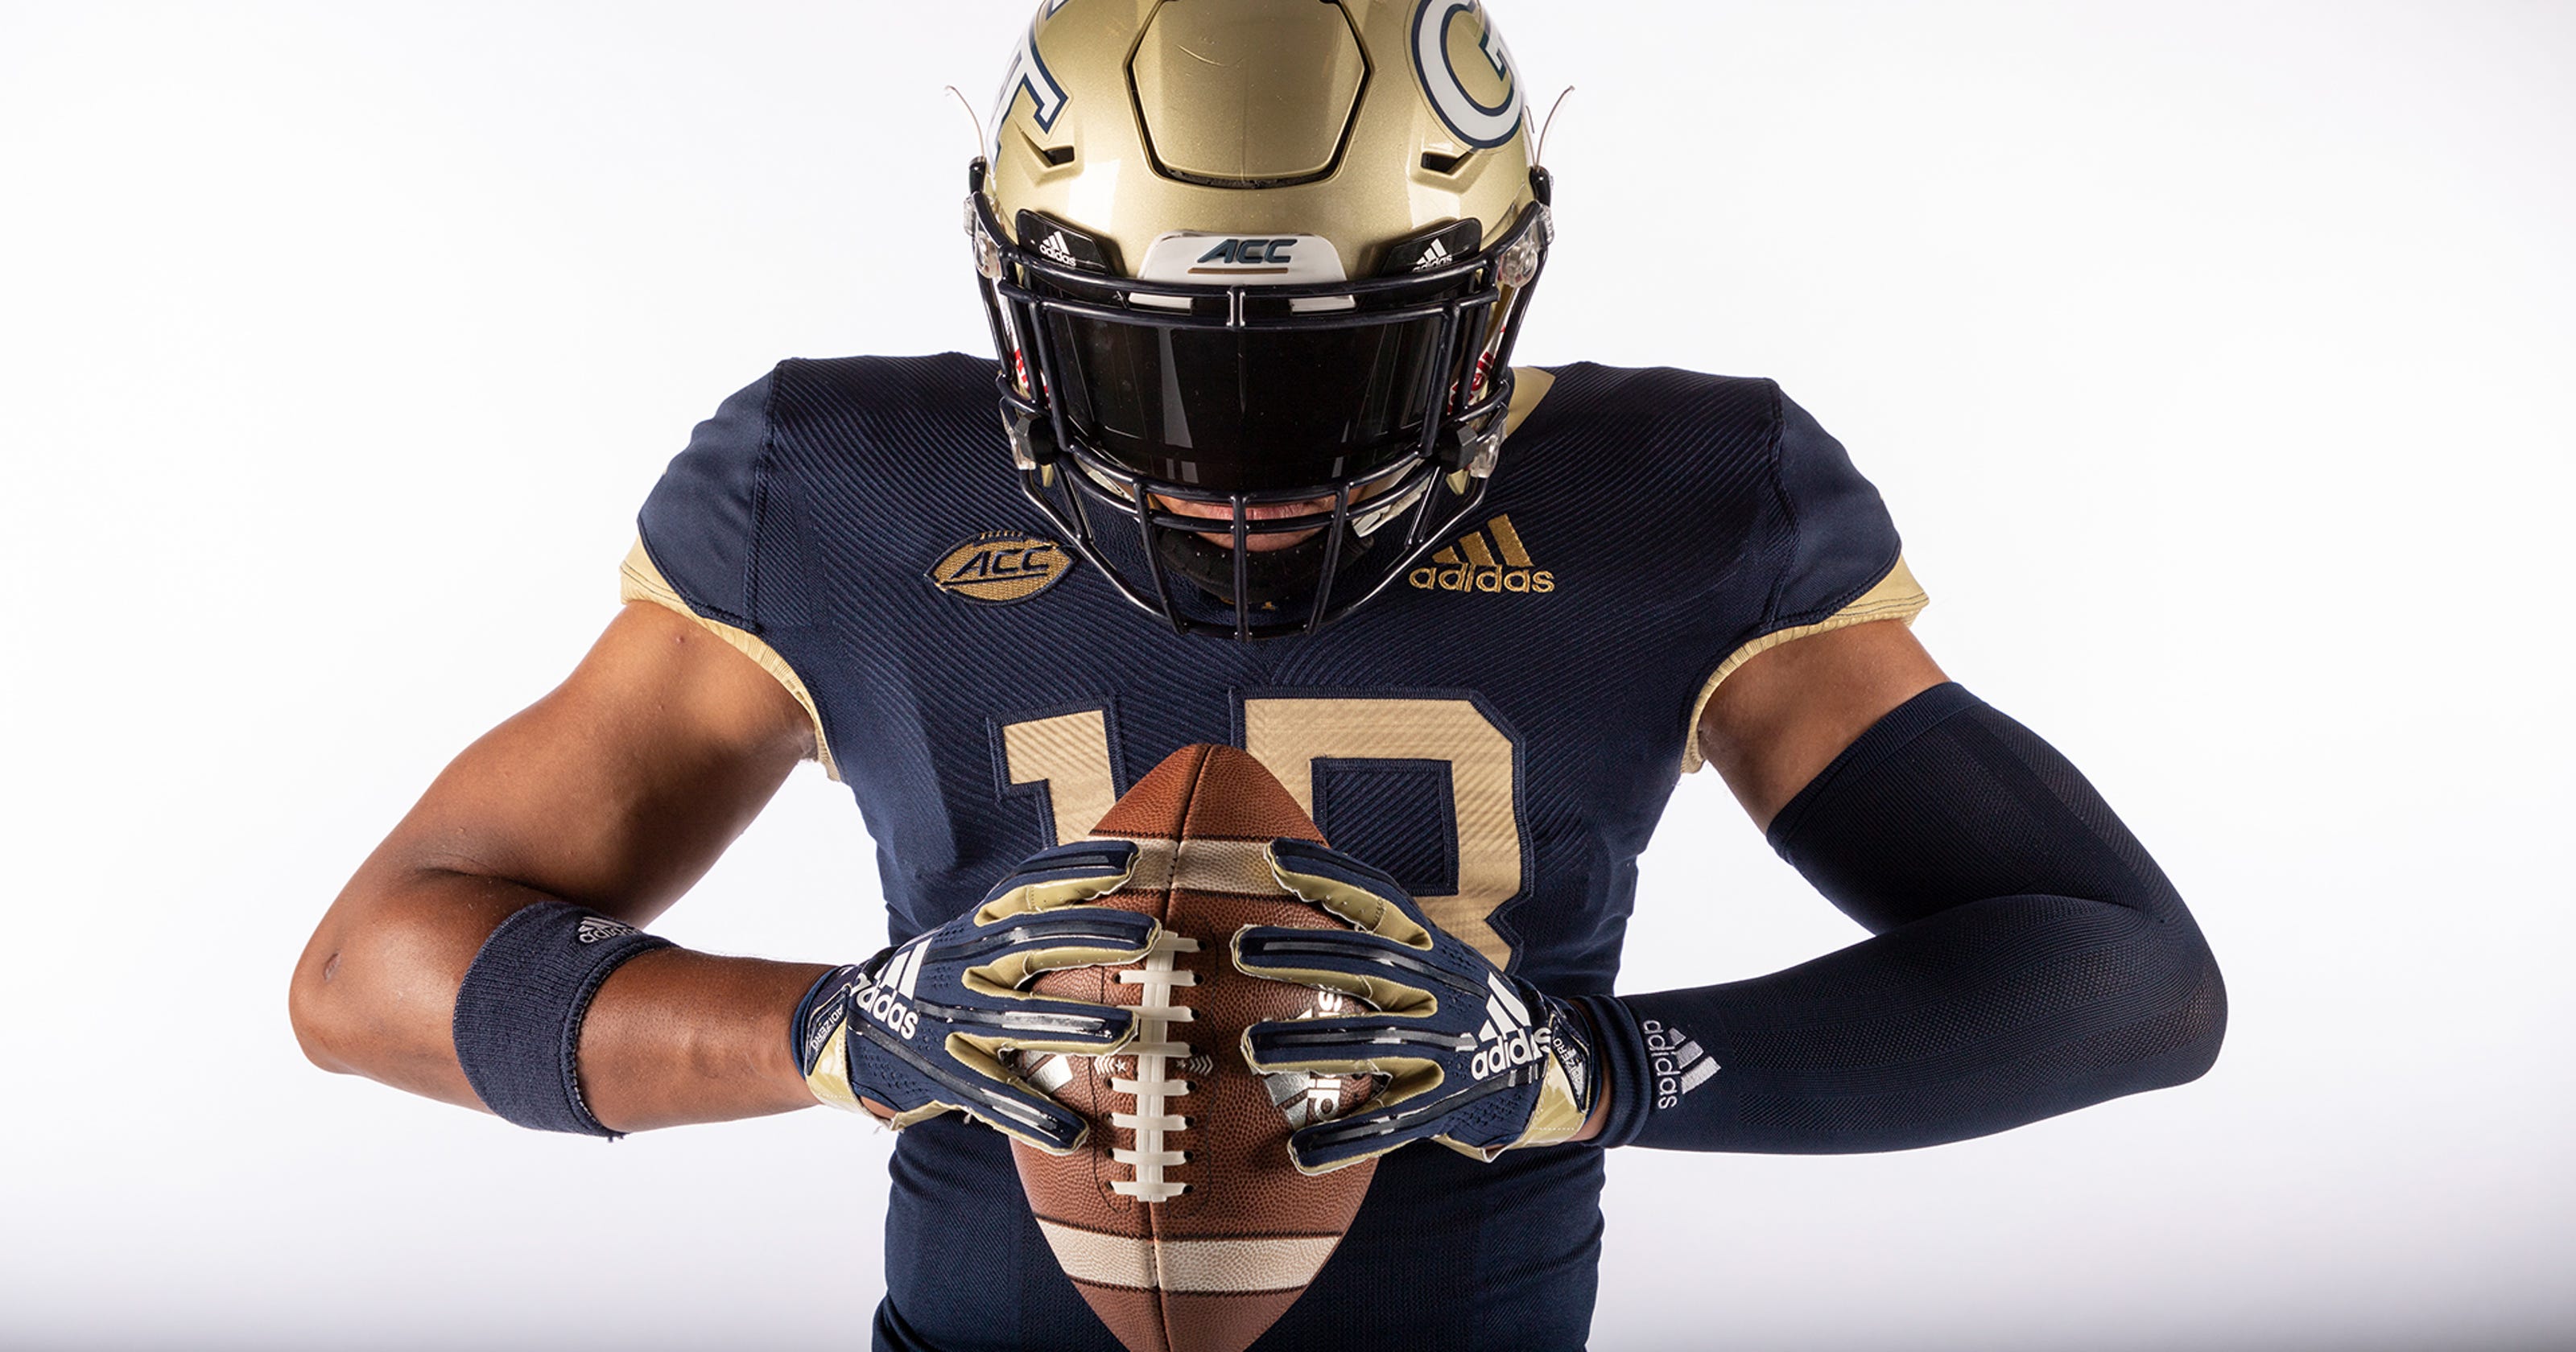 Tech to unveil throwback uniforms for game vs. Clemson